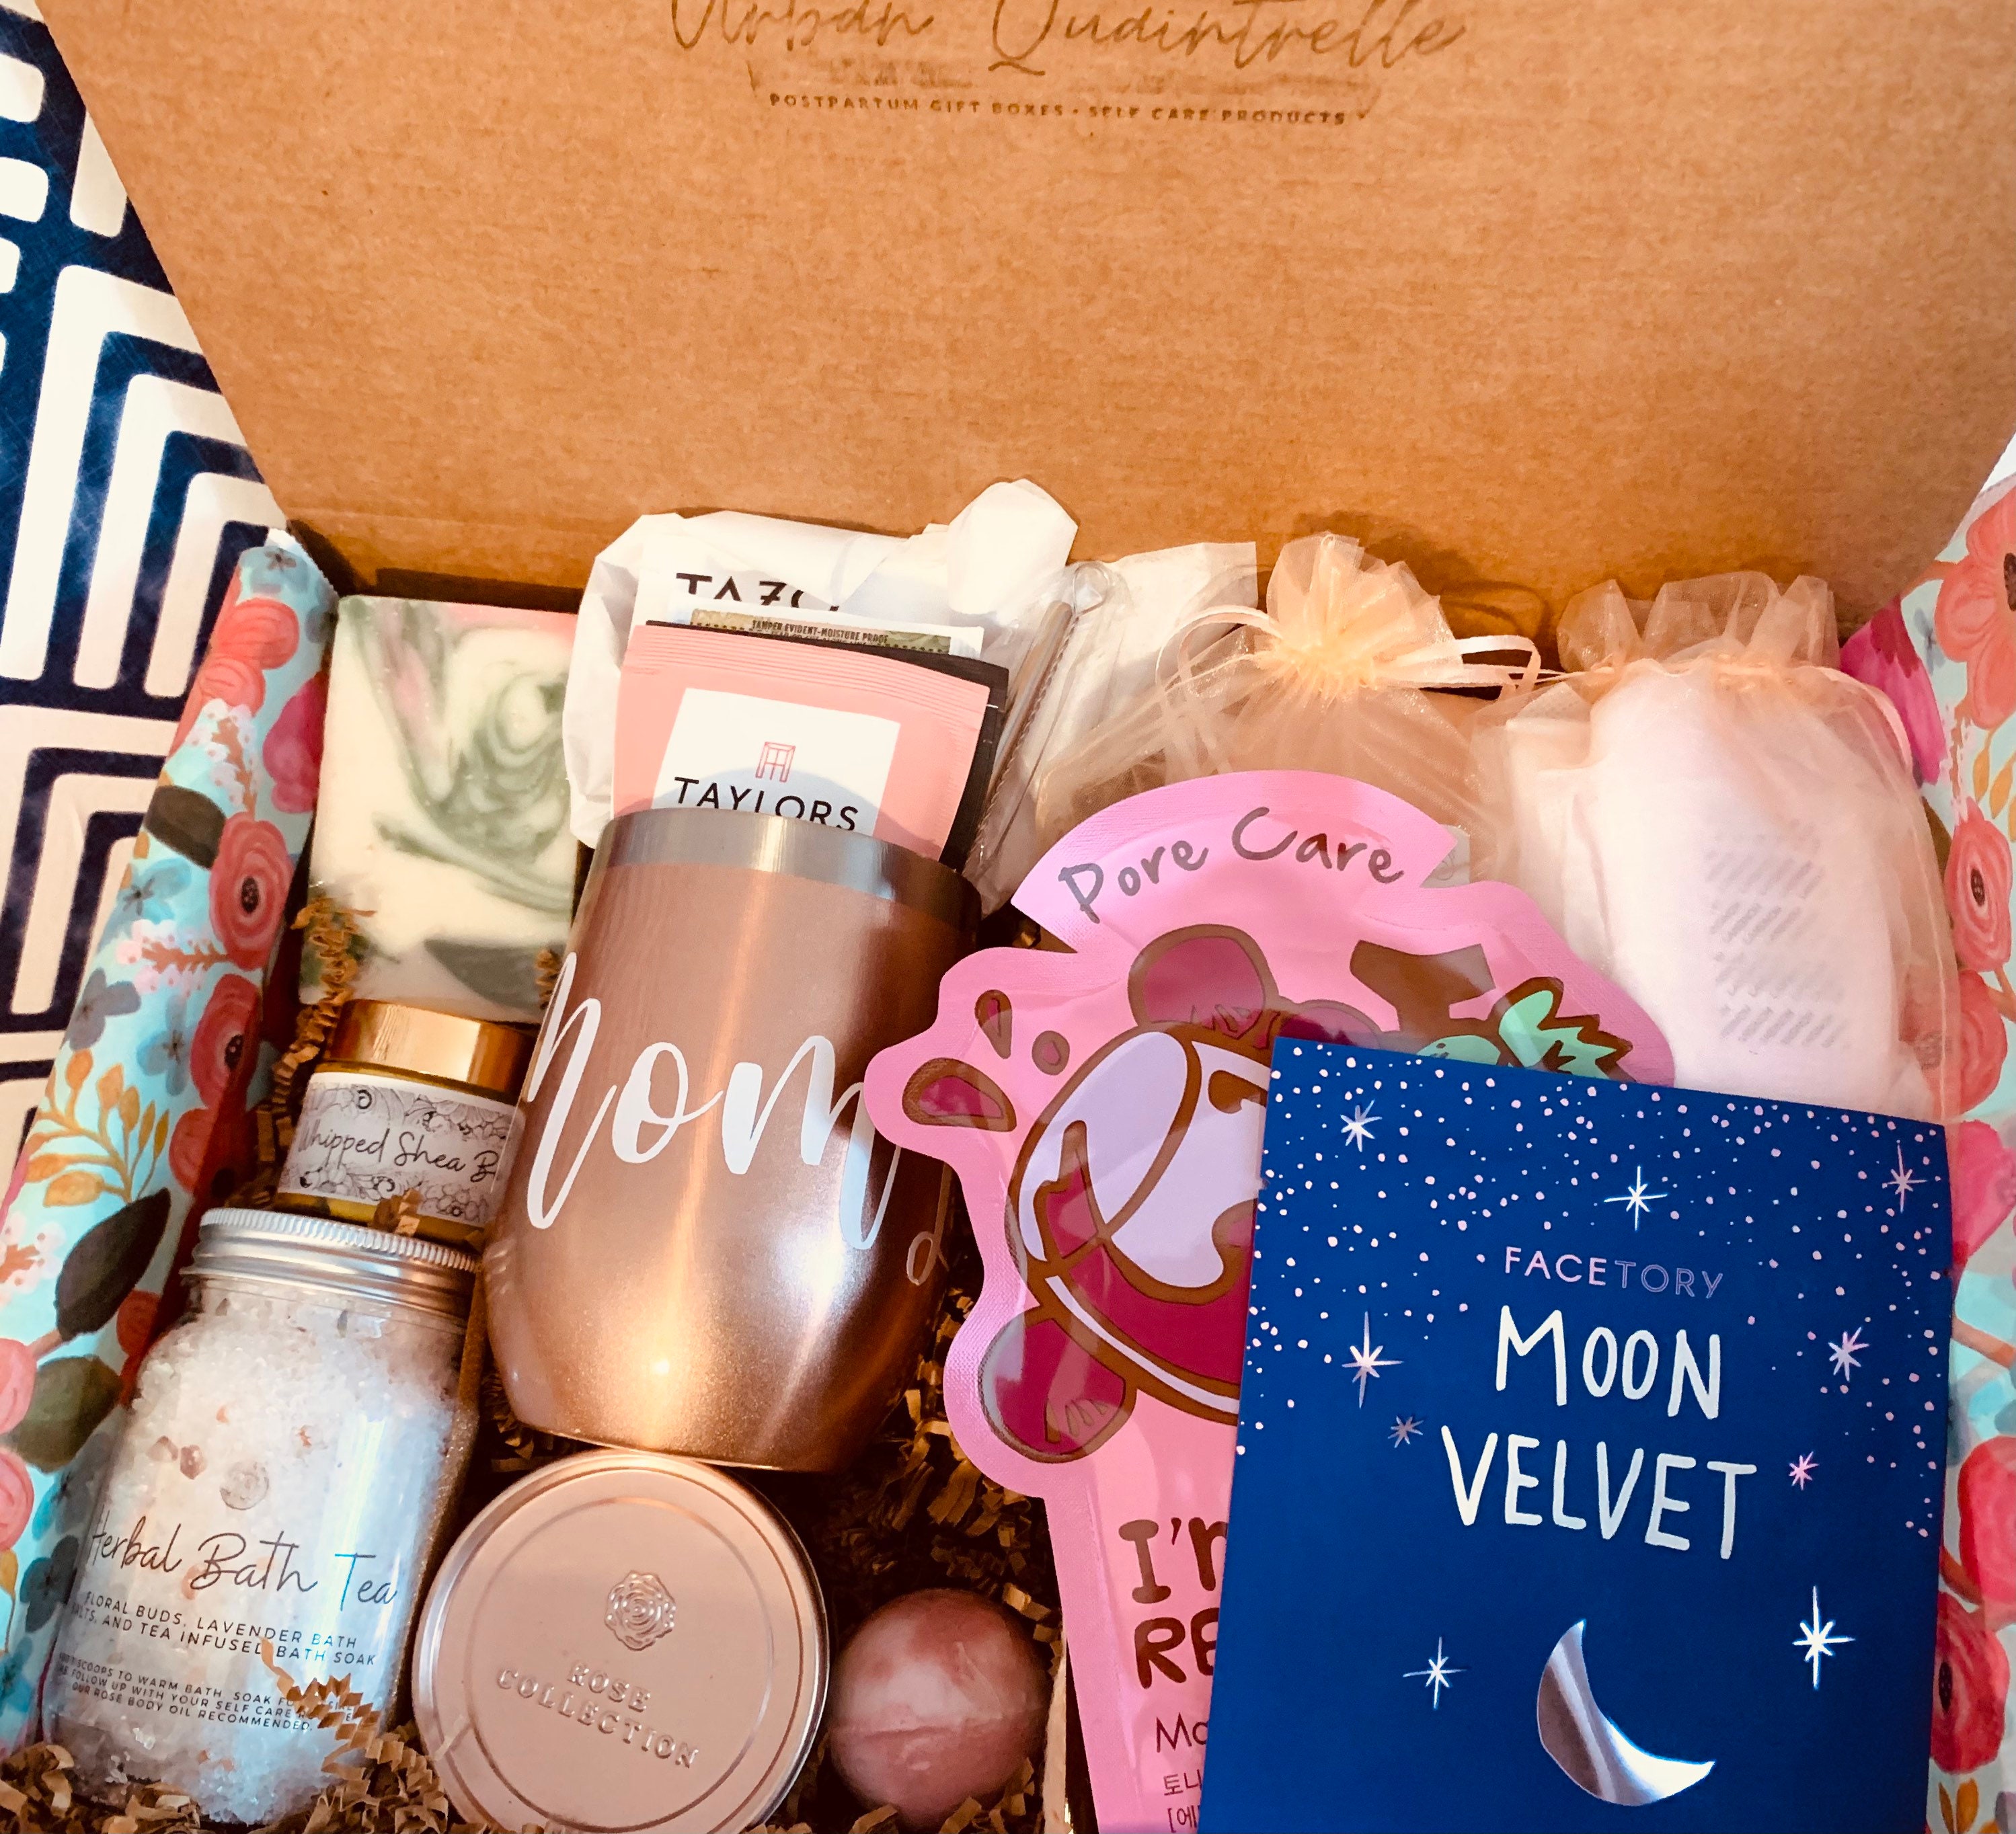 New Moms Gift Set (Postpartum Self Care Kit) 14 Variety Items: Lotions,  Snacks, Self Care & More for Mothers Wife Fiancé Ladies Females - The Care  Crate Co. 